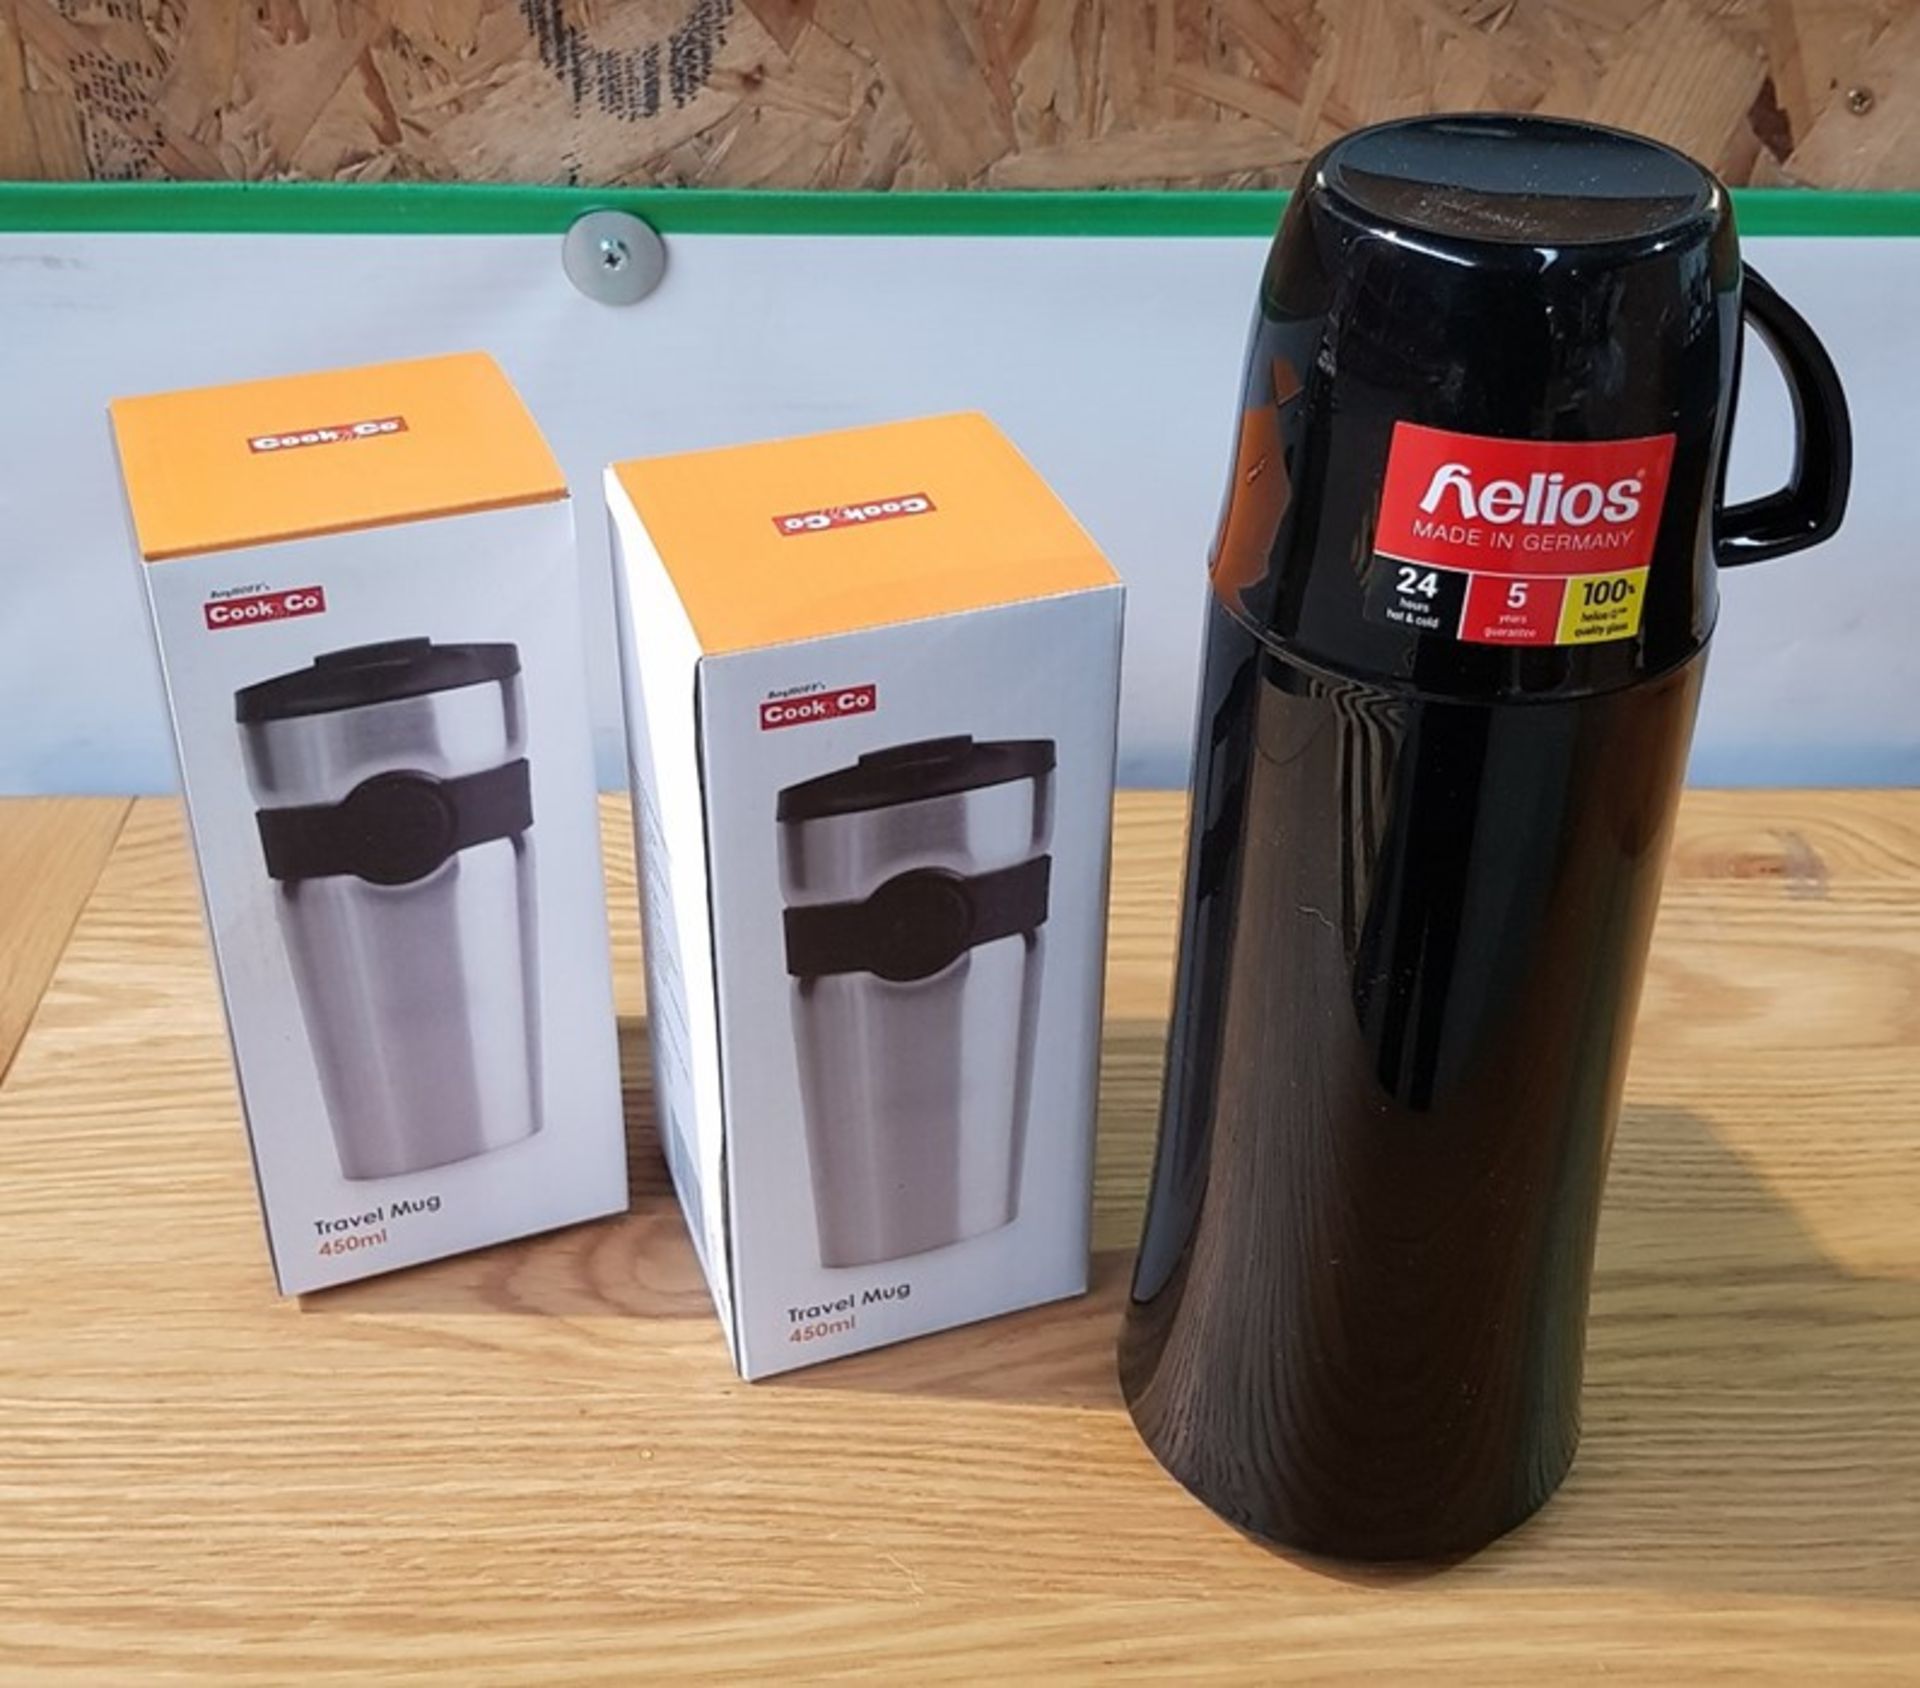 1 LOT TO CONTAIN 2 COOK 'N CO TRAVEL MUGS AND 1 HELIOS VACUUM FLASK / QTY - 3 PIECES / RRP £41.00 (